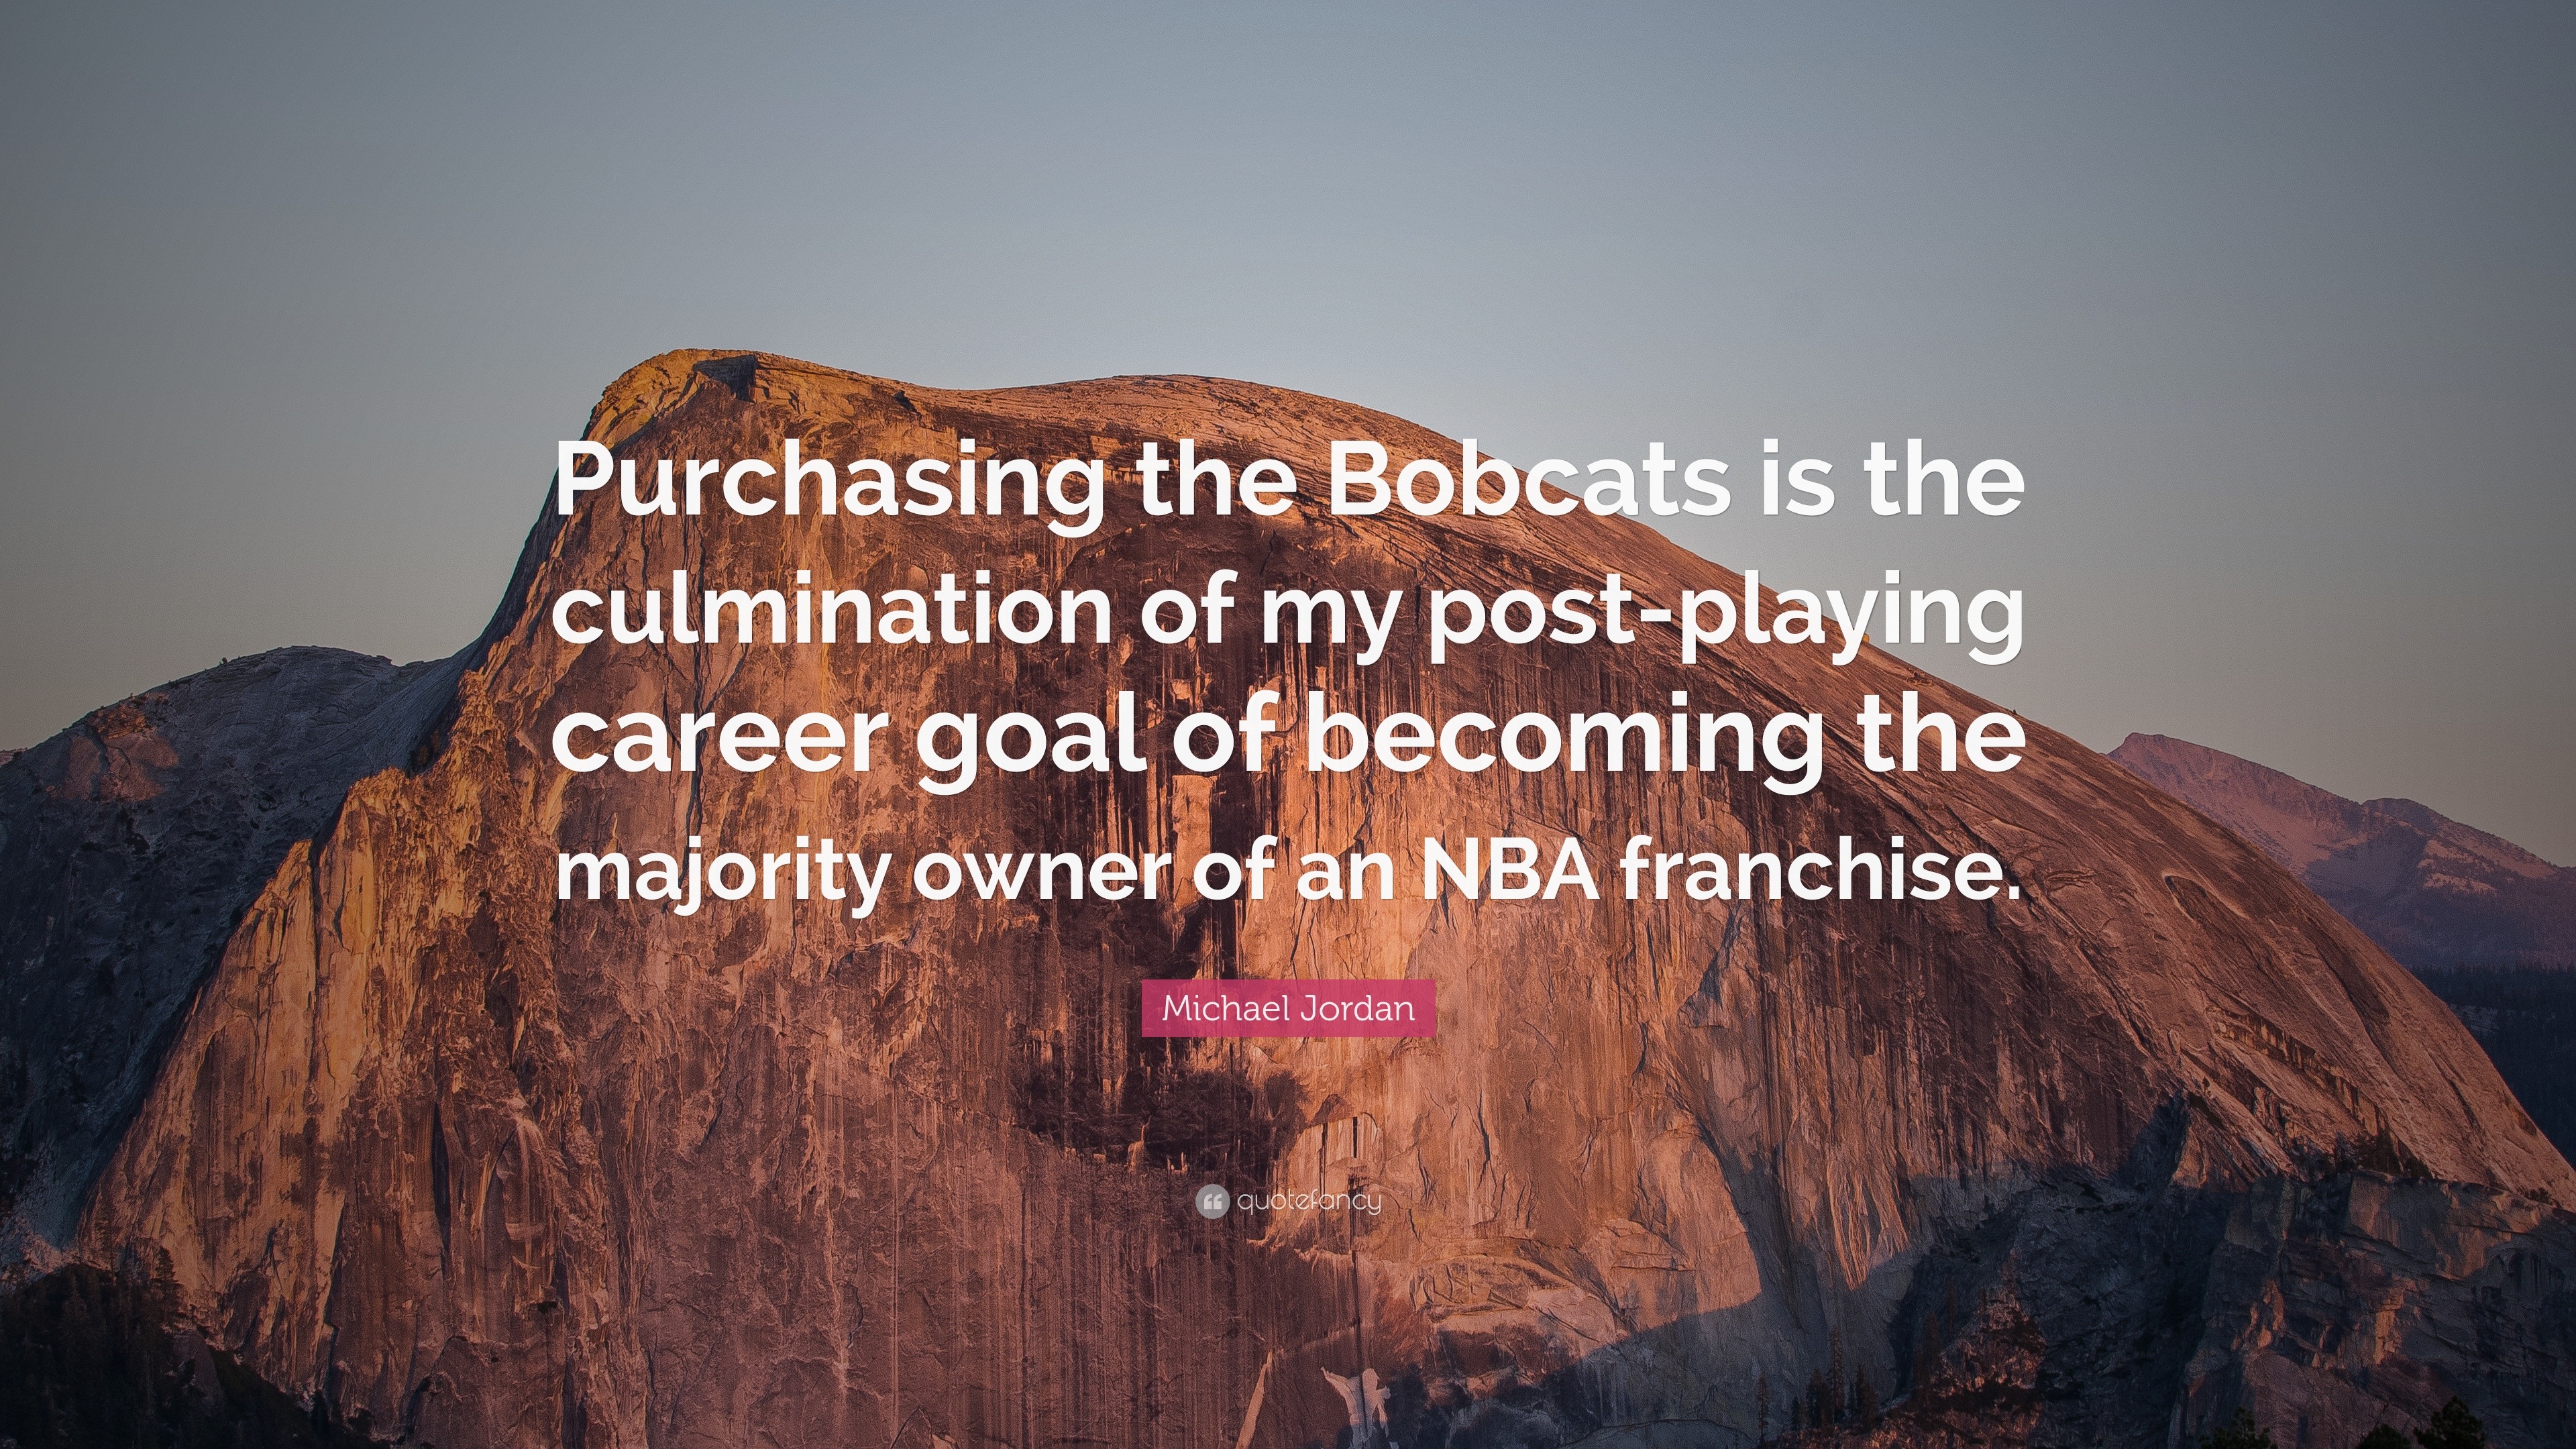 Michael Jordan Quote: “Purchasing the Bobcats is the culmination of my